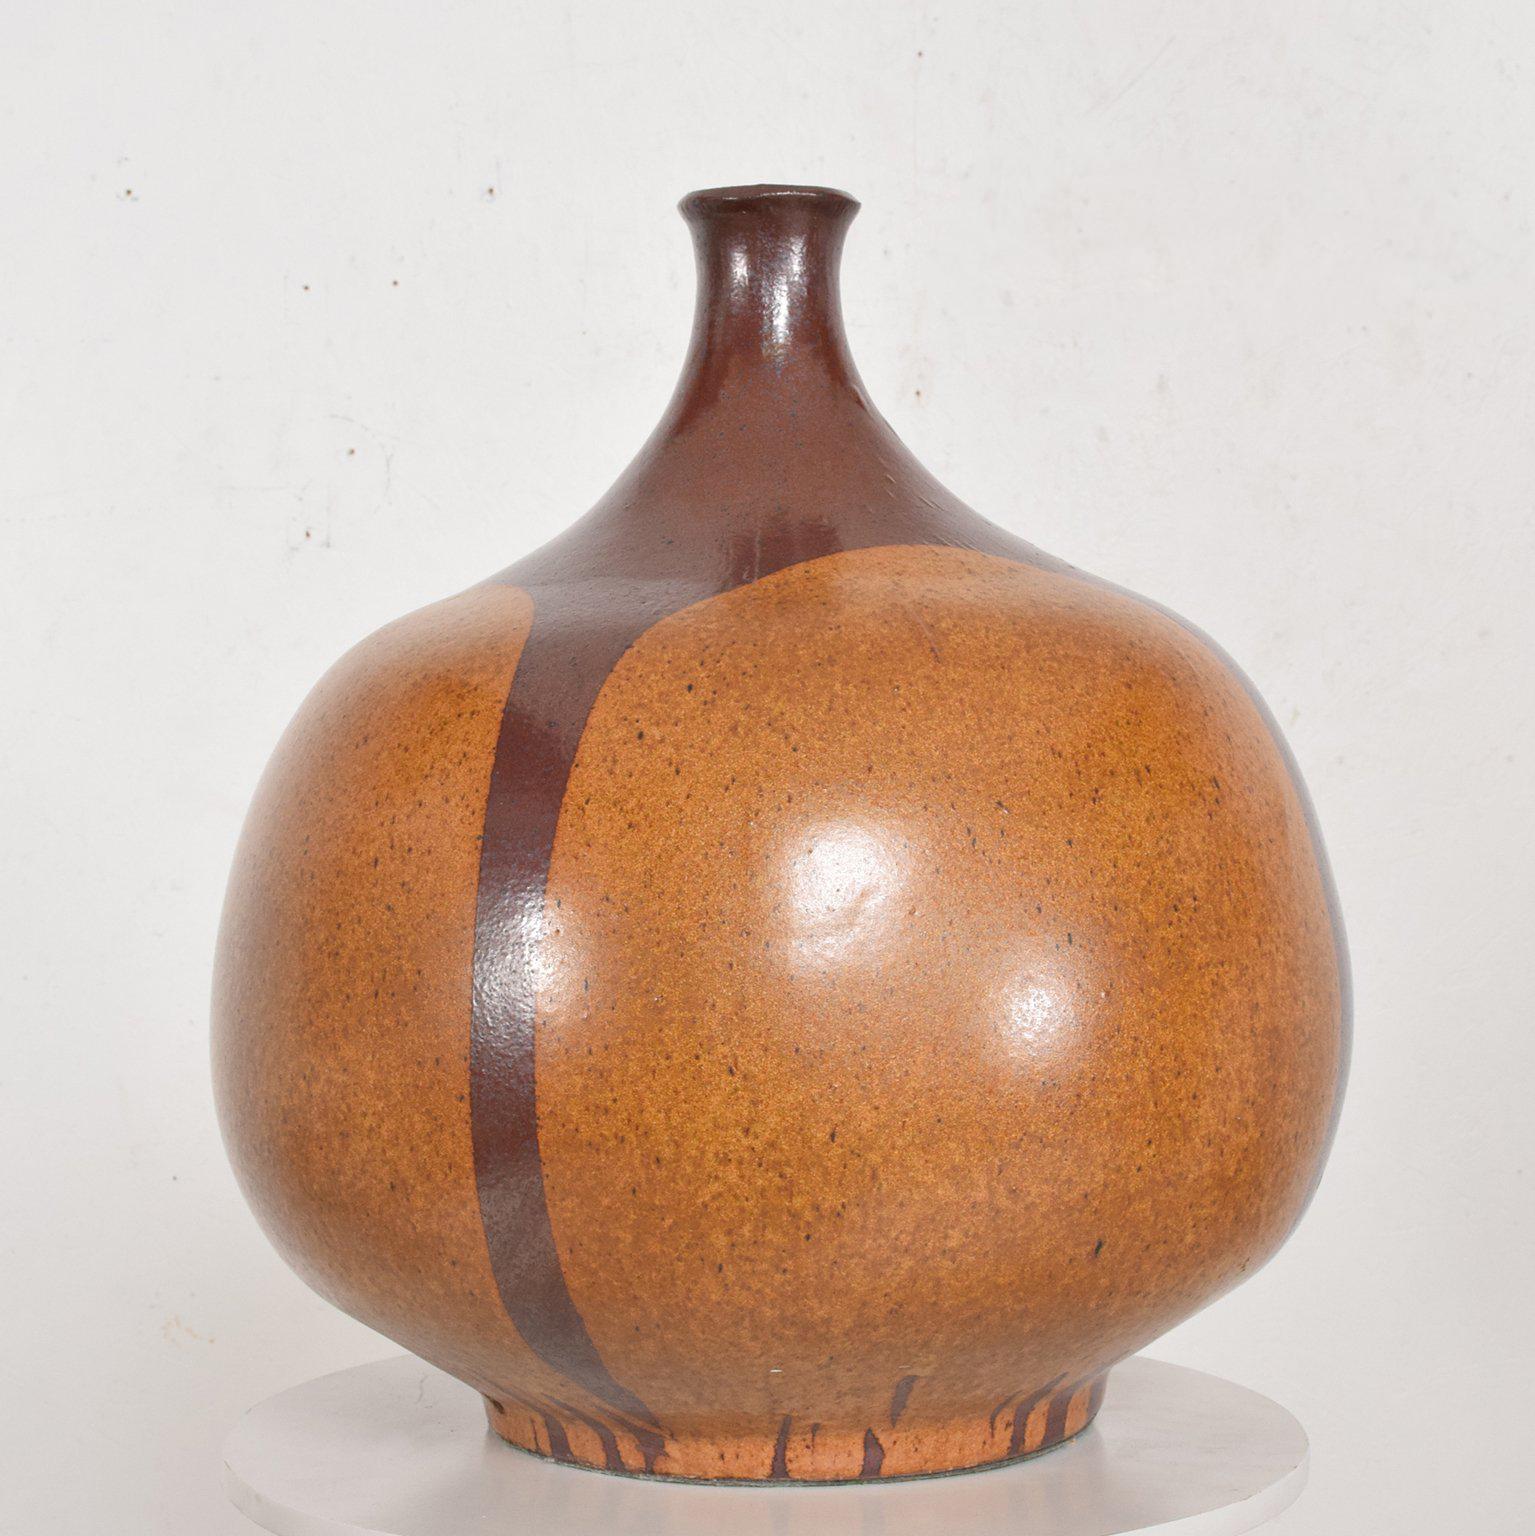 For your consideration a vintage oversized ceramic vase by David Cressey.

Dimensions: 22